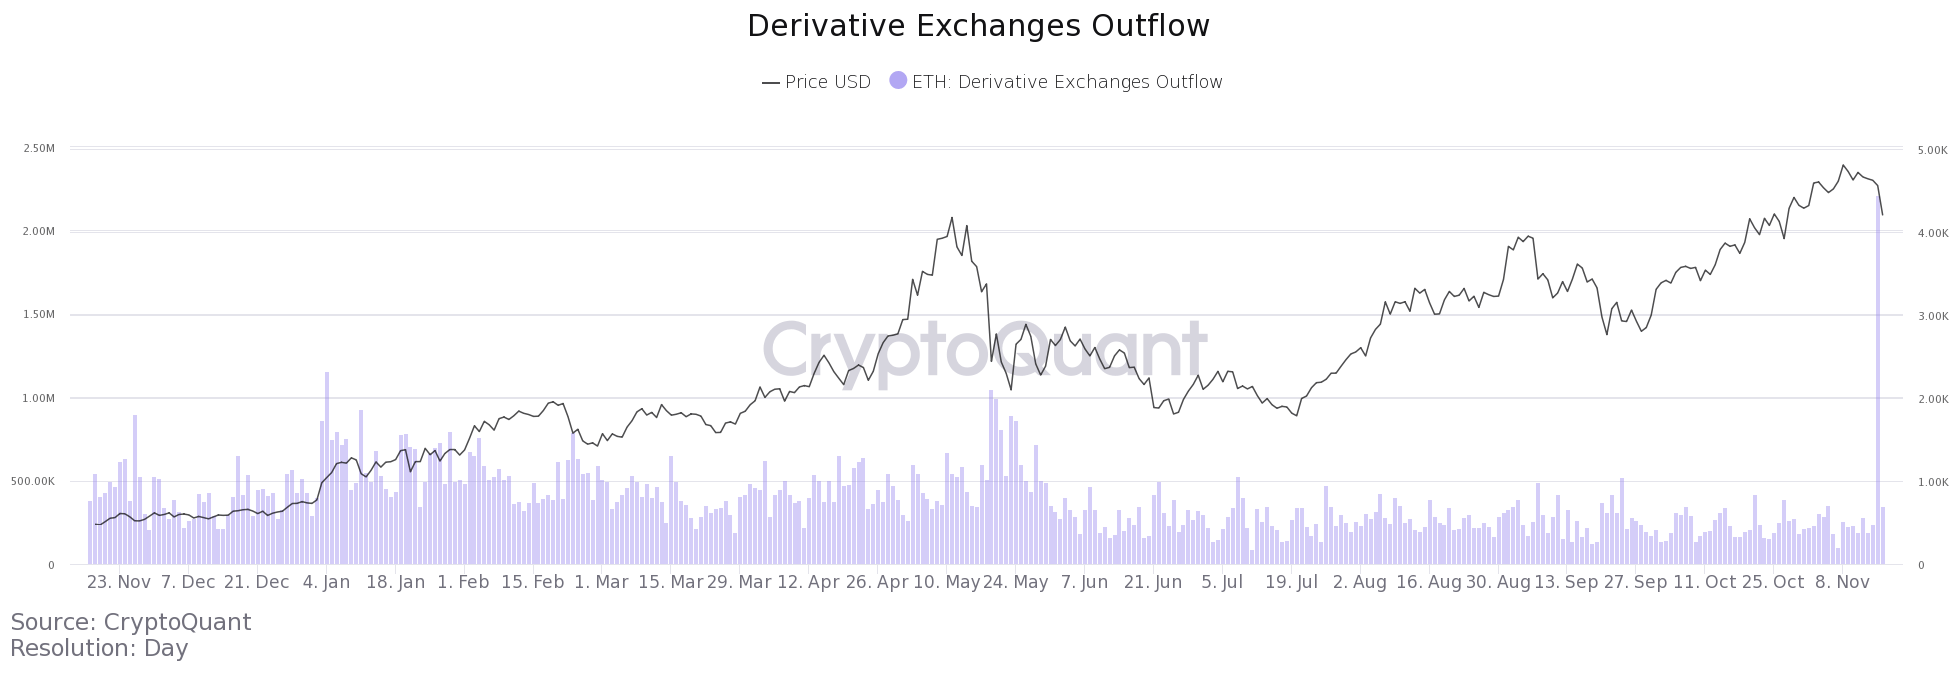 ETH derivative exchange outflow